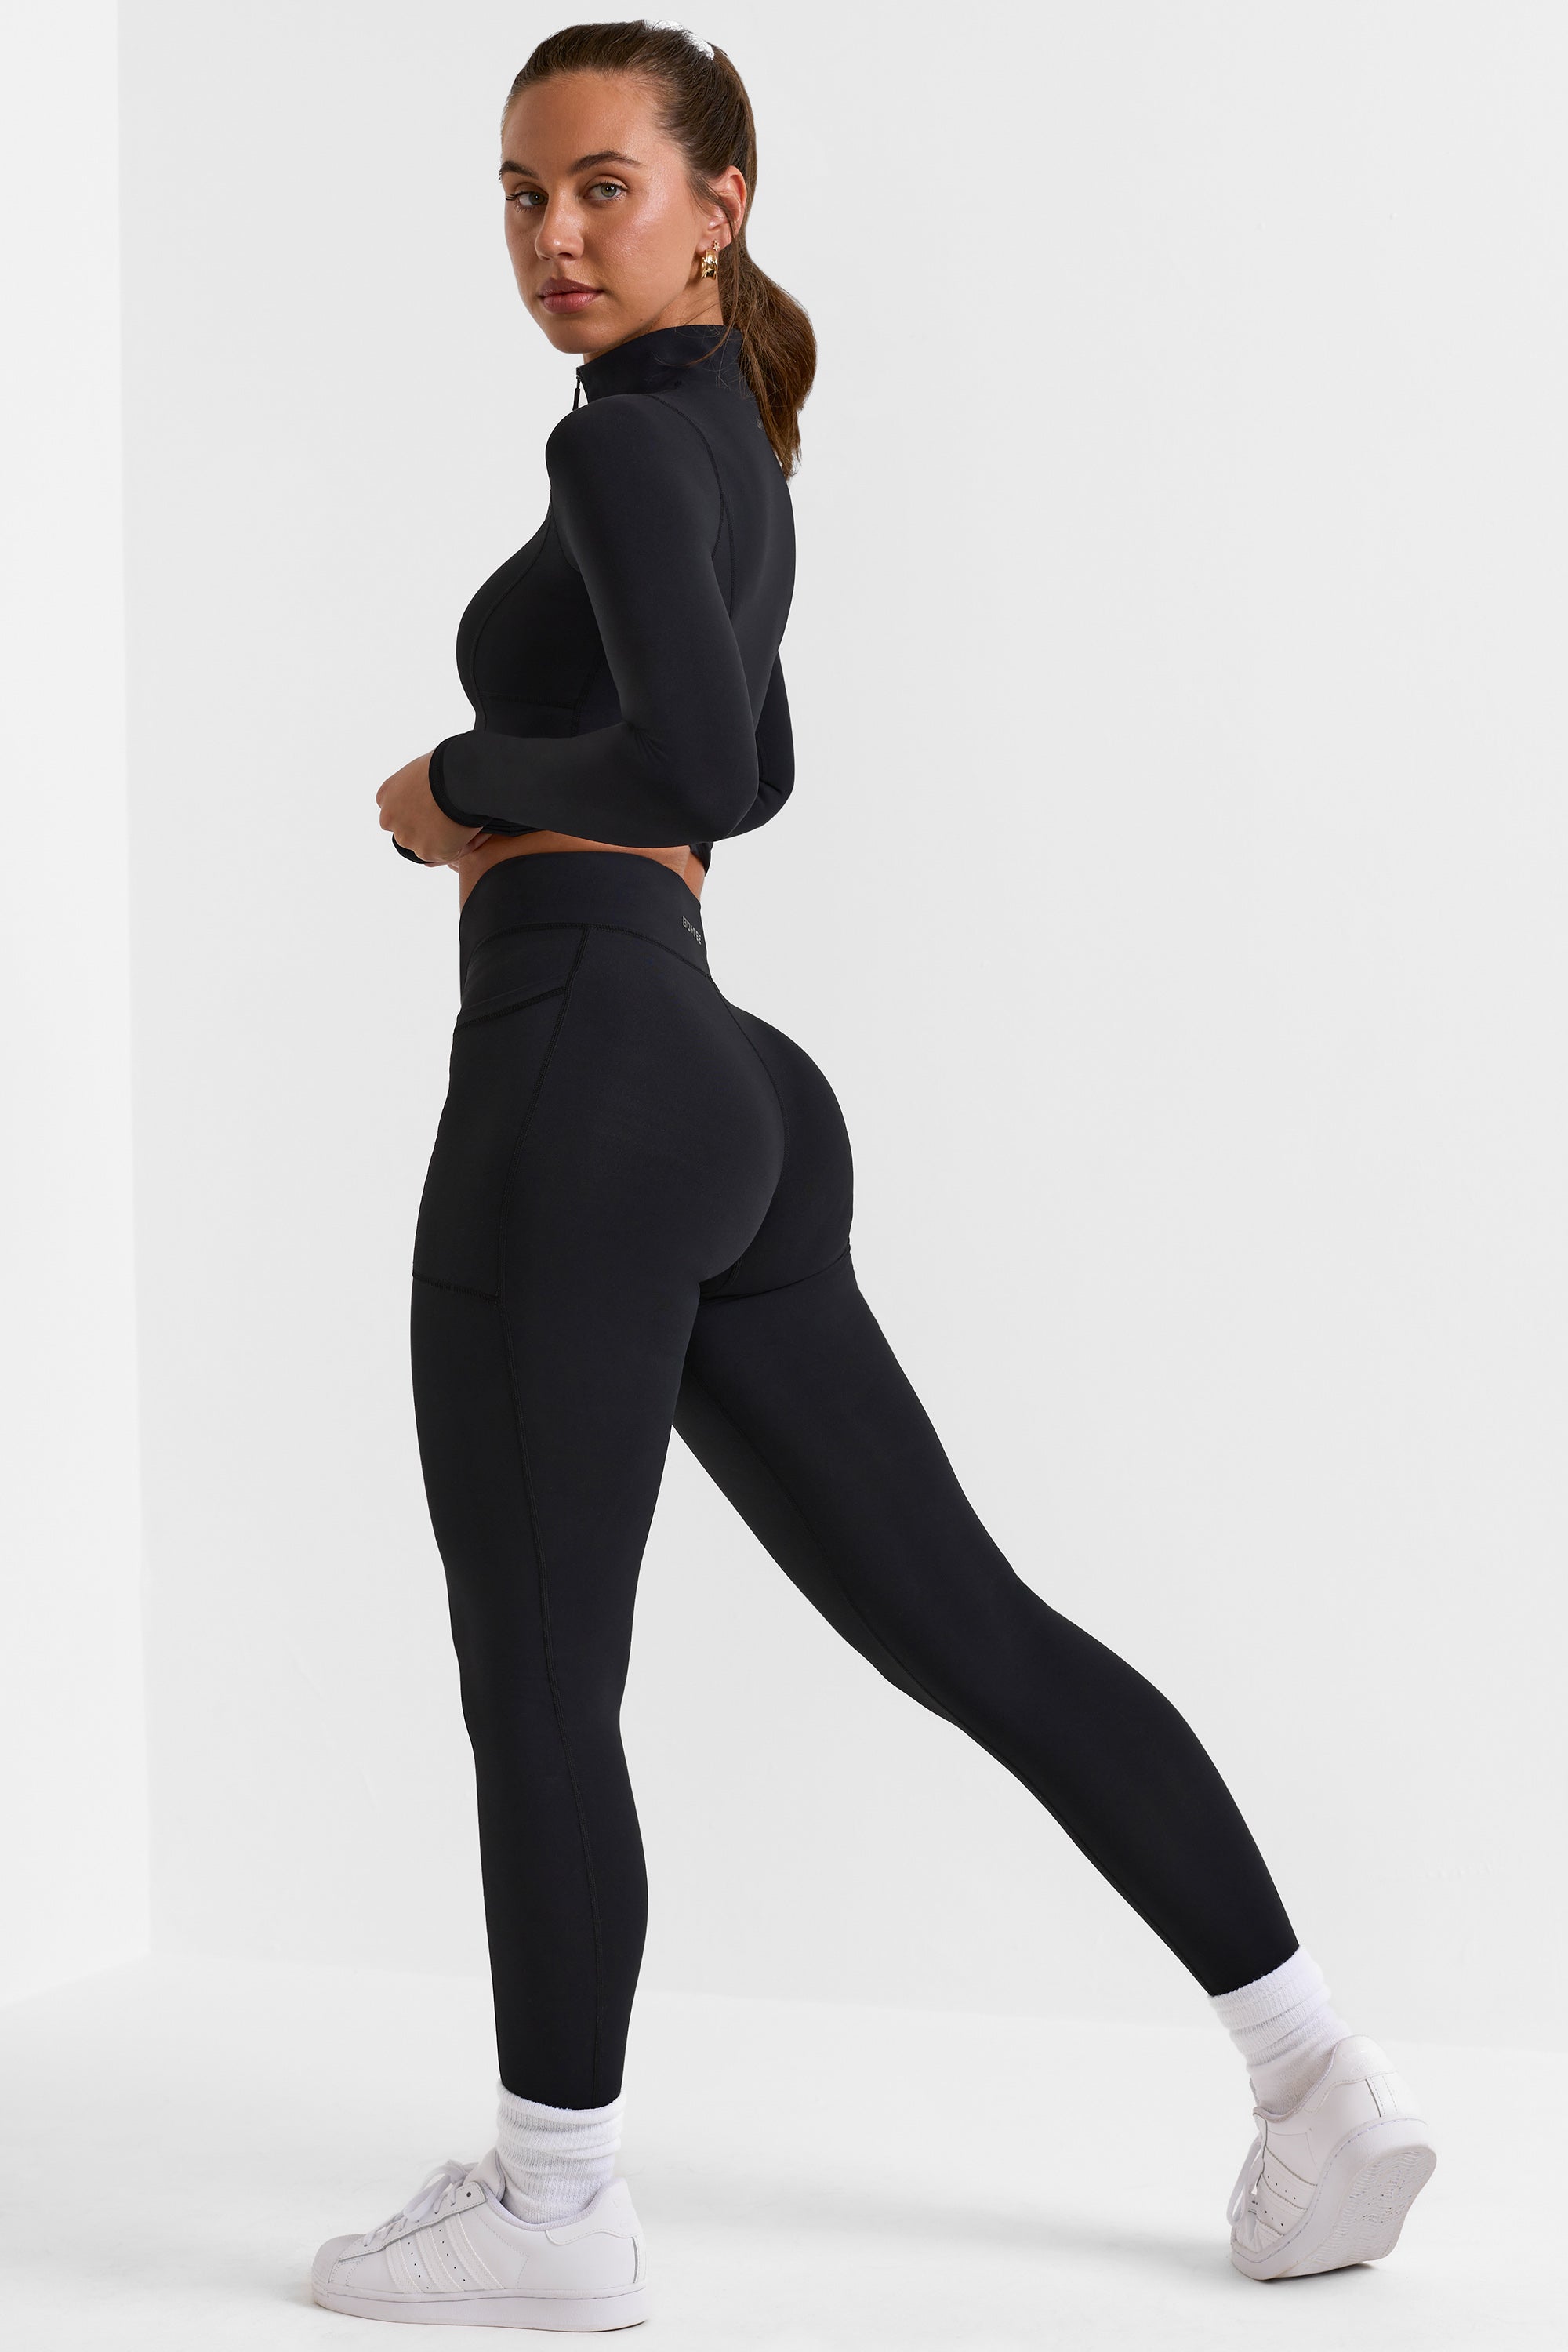 Amazon.com: JEGGE High Waist Yoga Leggings with 4 Pockets,Tummy Control  Workout Running 4 Way Stretch Cargo Pocket Leggings (Black, X-Small) :  Clothing, Shoes & Jewelry